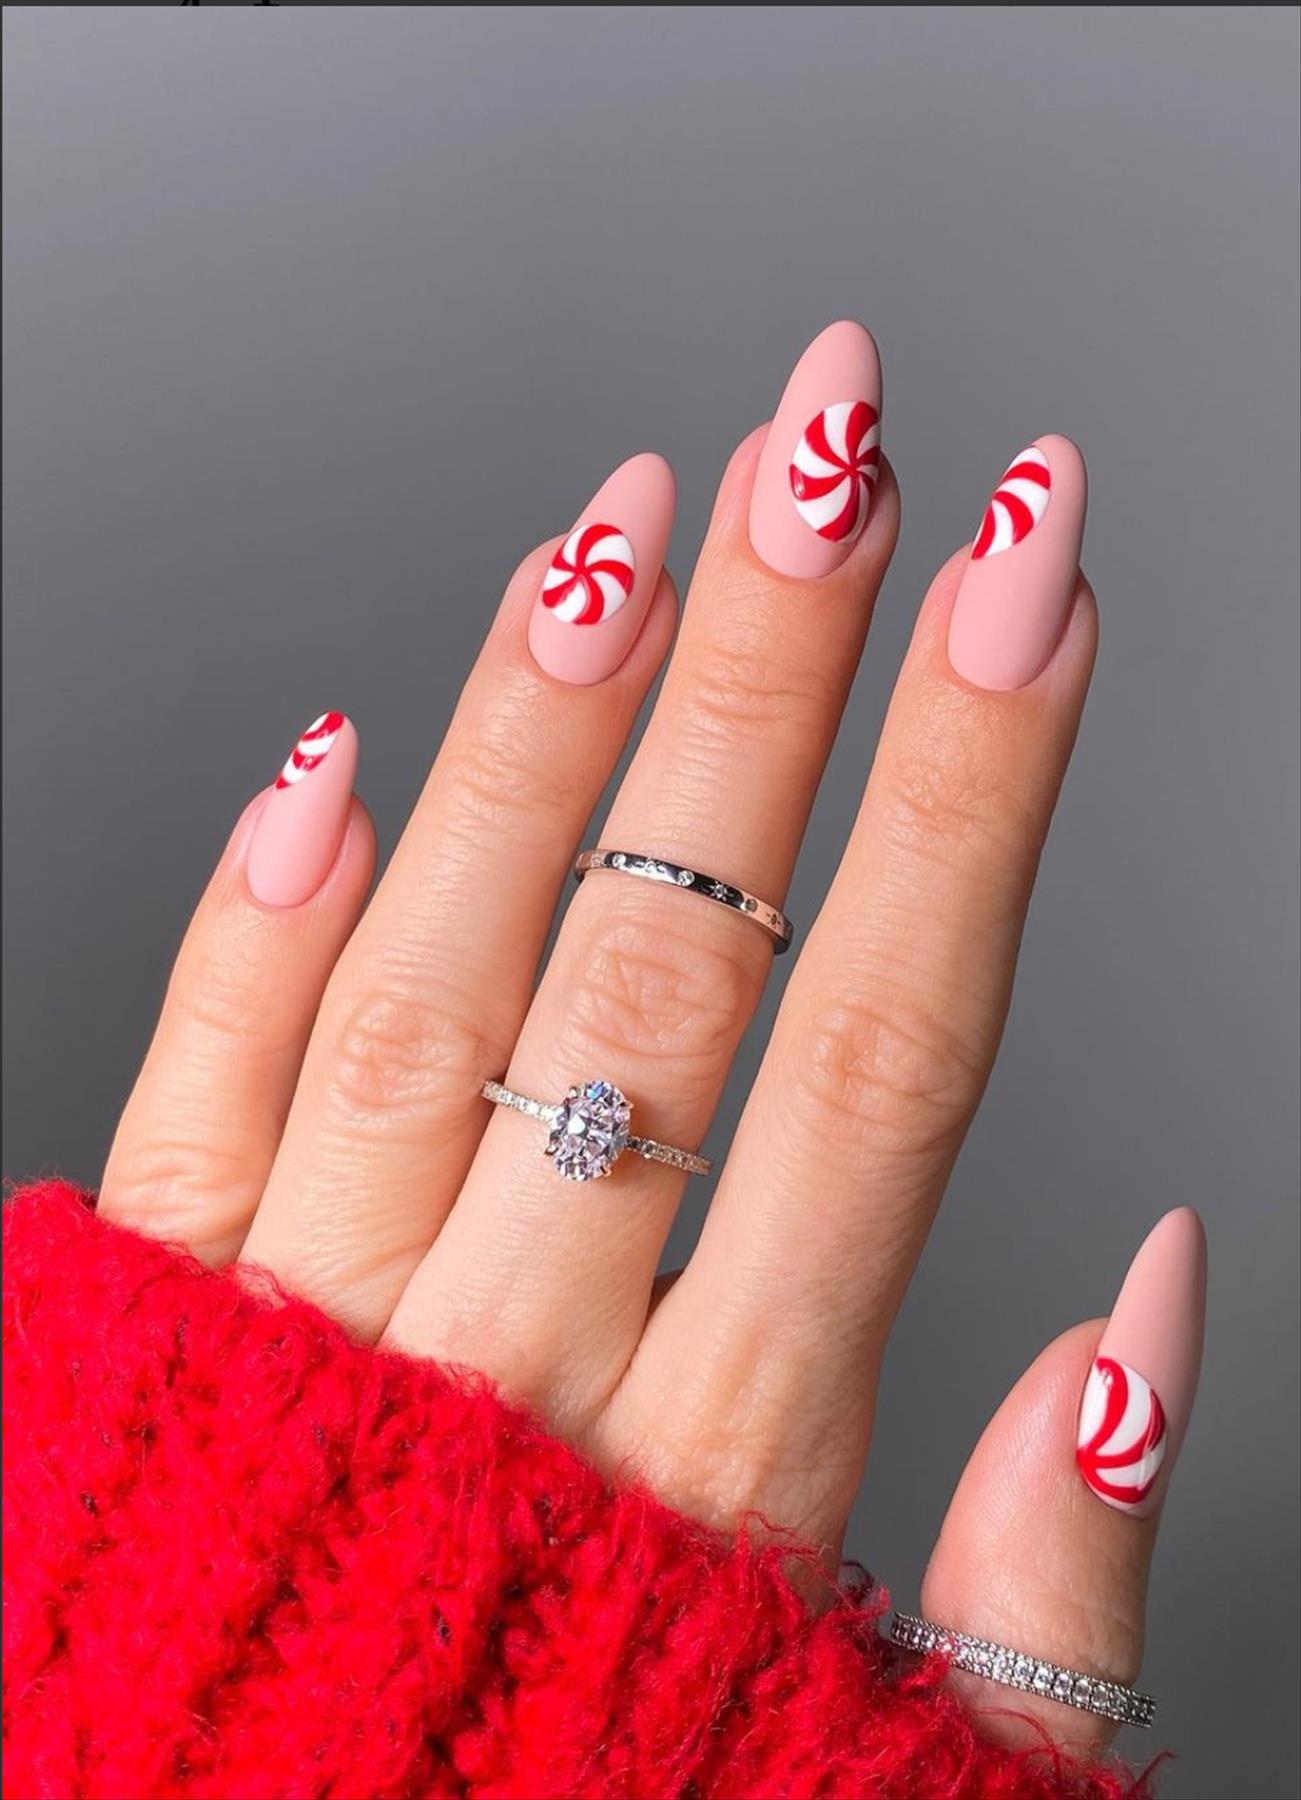 Best Christmas nail design for Winter Holiday 2021